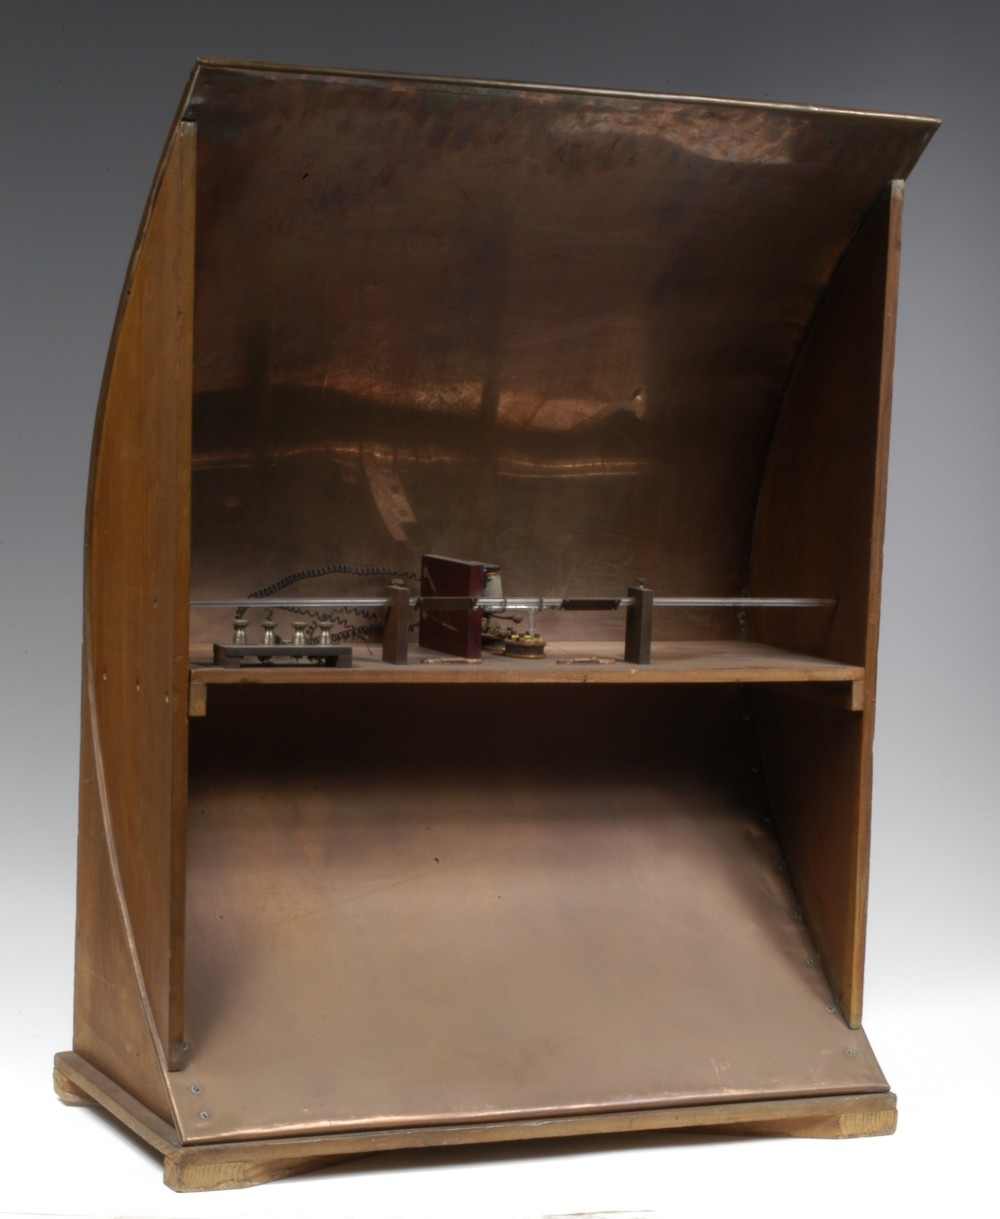 preview image for Marconi's Parabolic Receiver, by Guglielmo Marconi, English, c. 1896